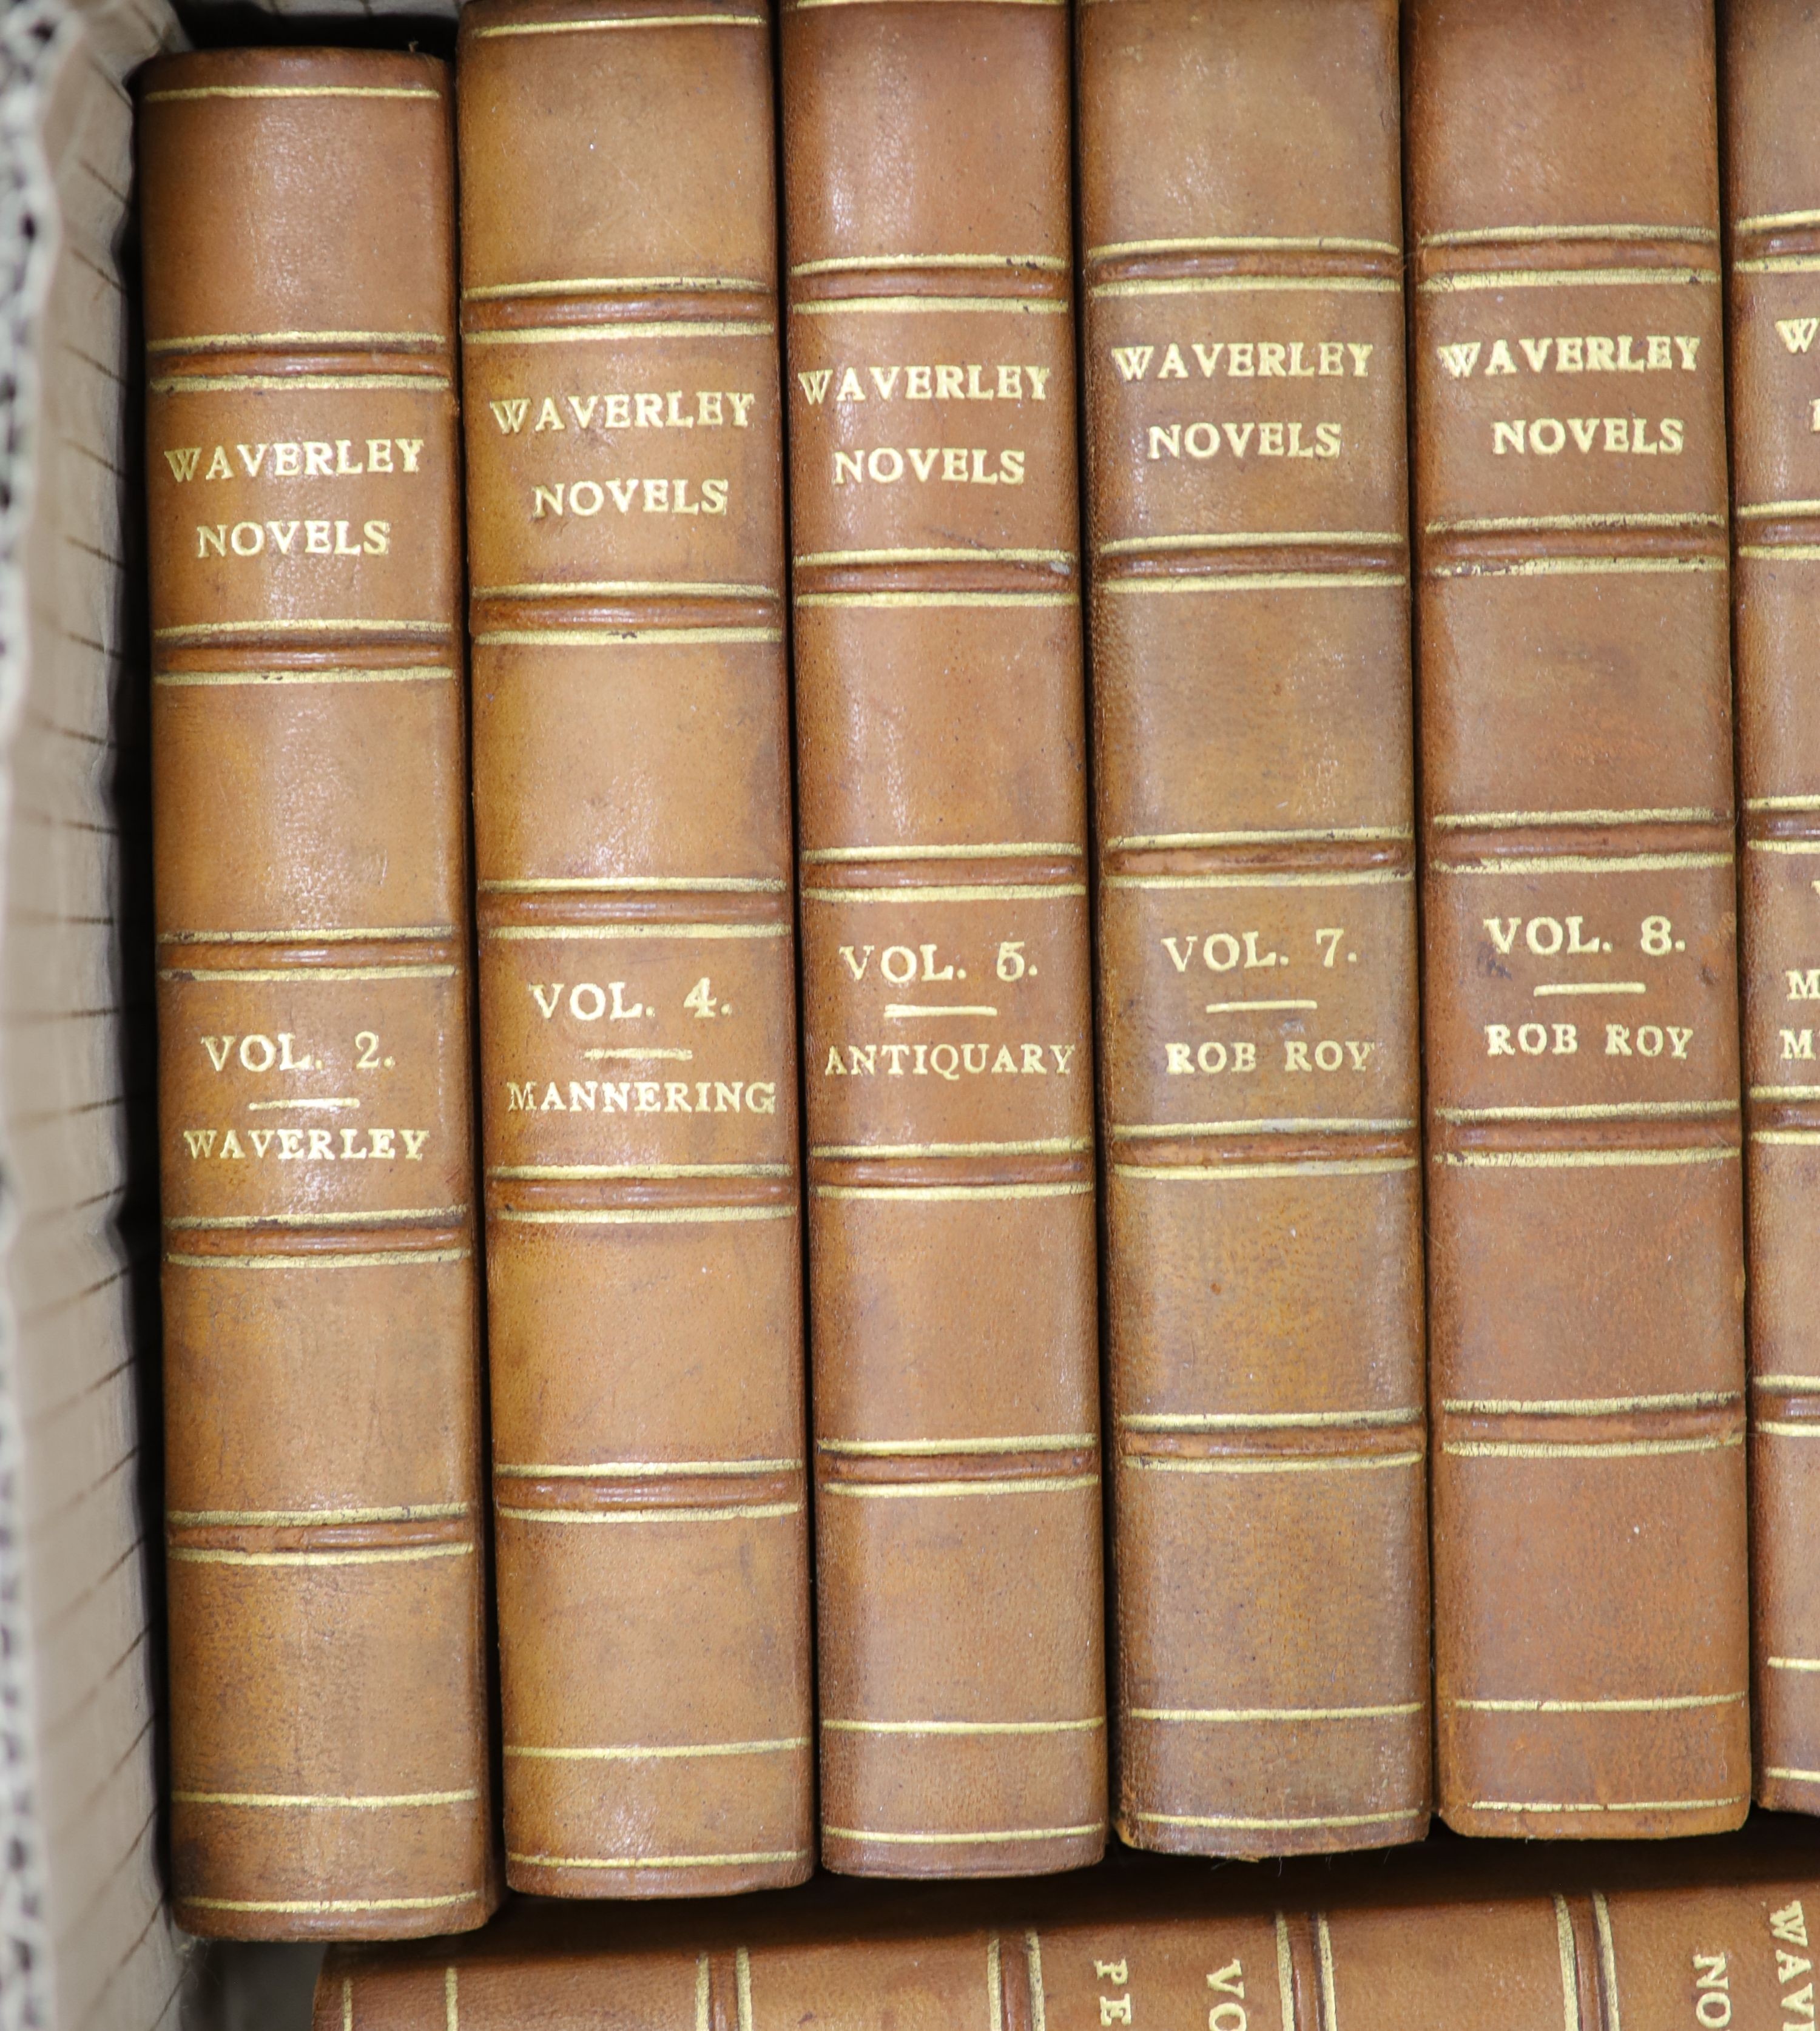 Anon. (Sir Walter Scott) - Waverly Novels. 48 vols. Each complete with an engraved frontispiece and title page vignette, with guards. Half calf and marble boards, gilt ruled and panelled spines with letters direct. Marbl